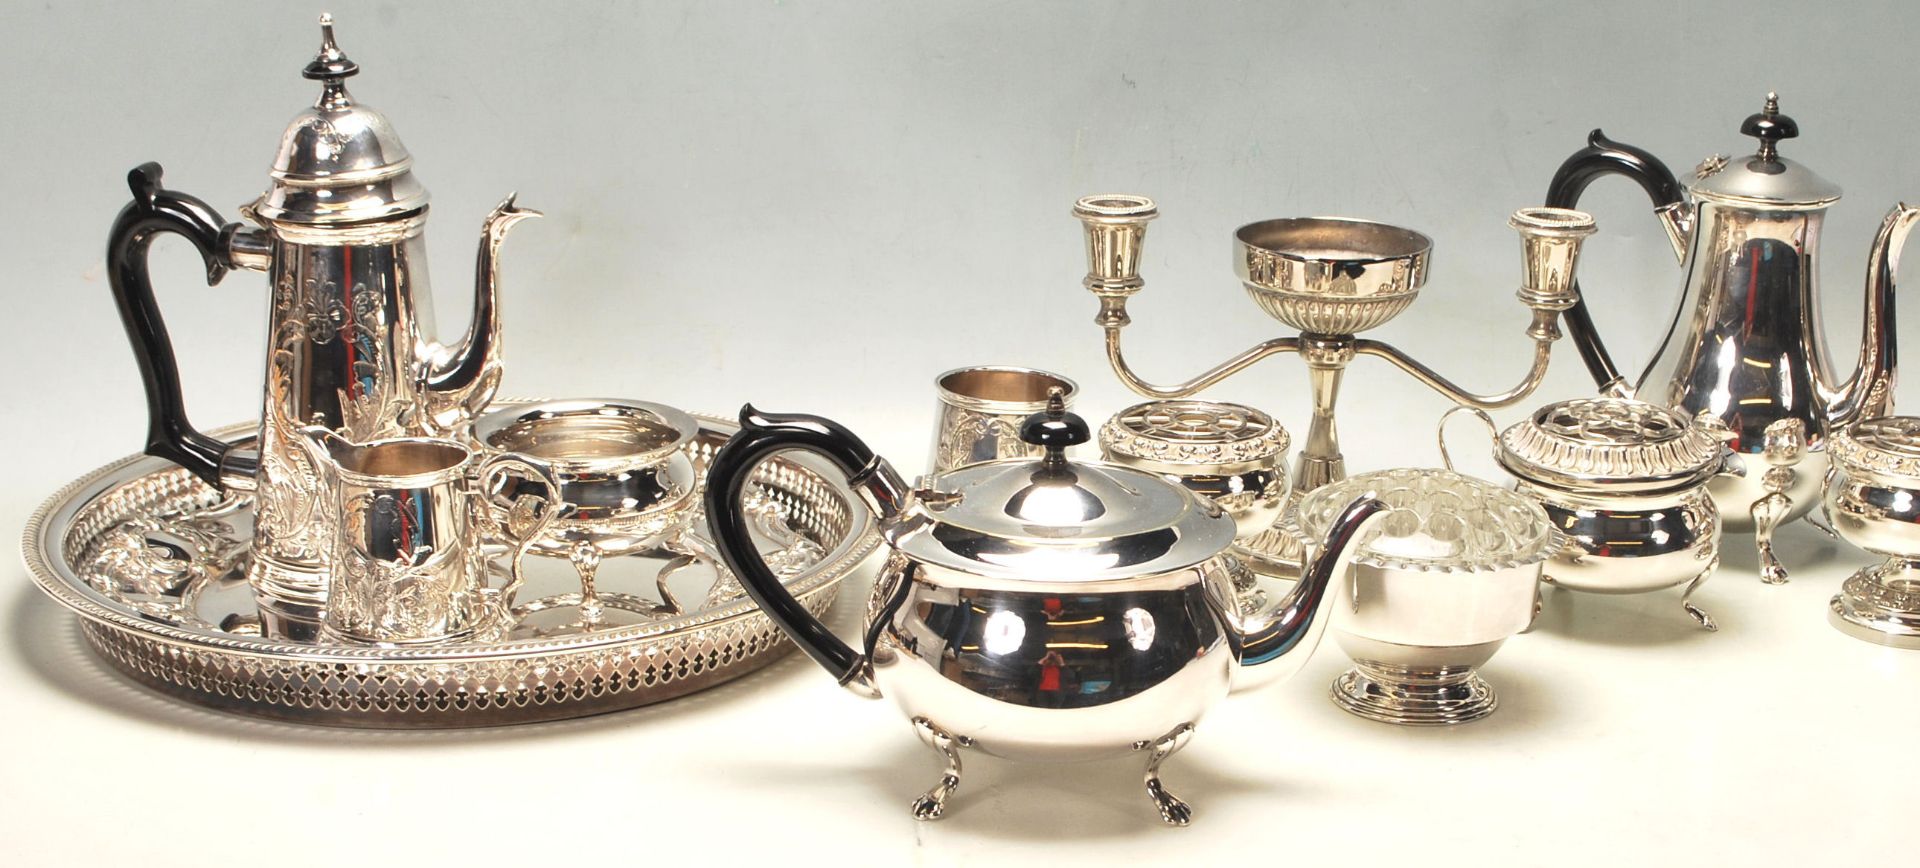 LARGE COLLECTION OF 20TH CENTURY SILVER PLATE ITEMS